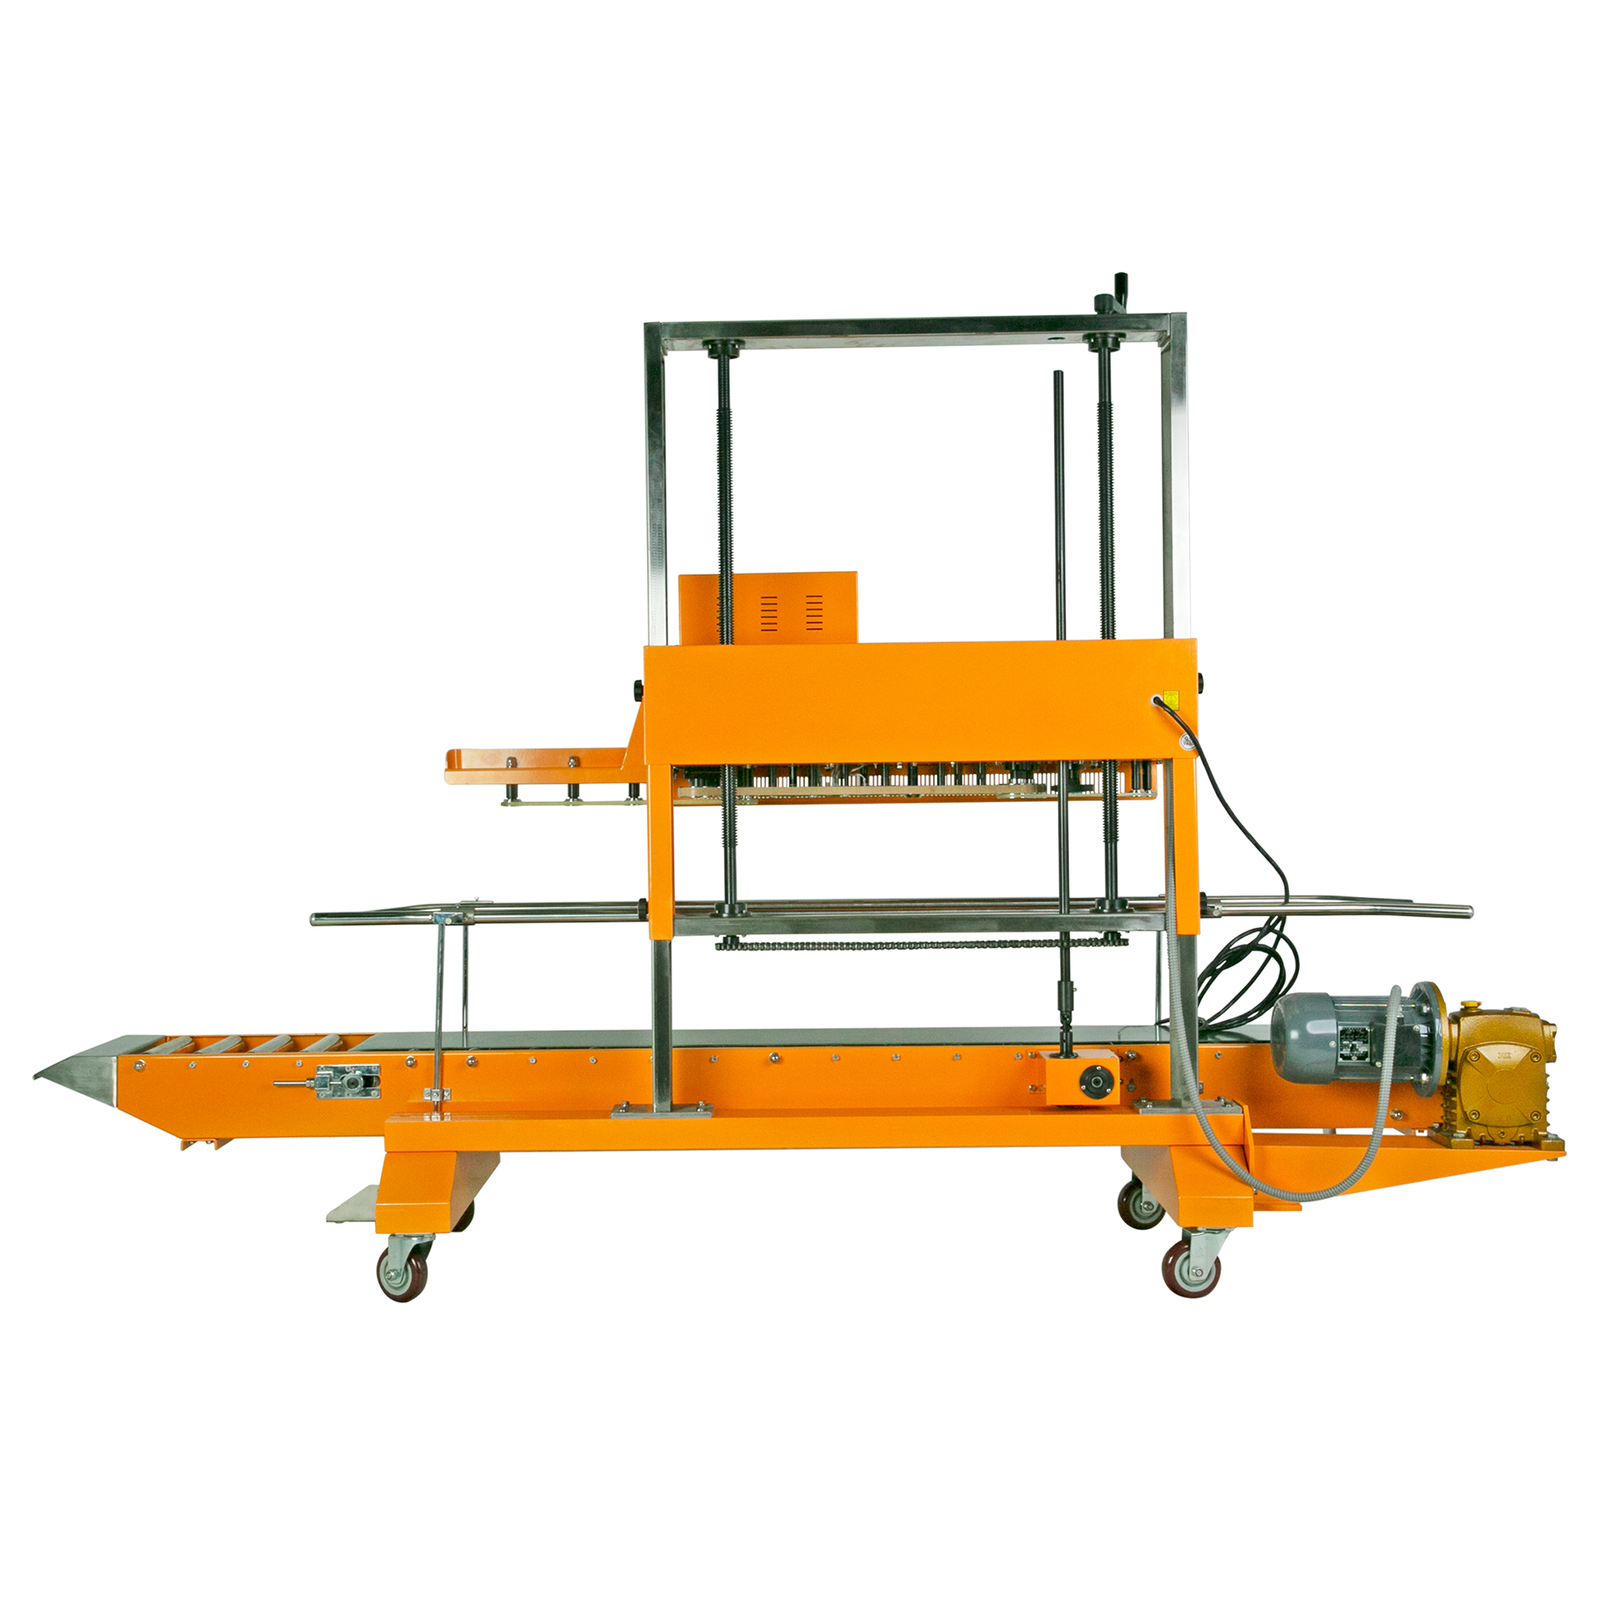 Back view of yellow JORES TECHNOLOGIES® heavy duty vertical continuous band sealer for sealing large bags